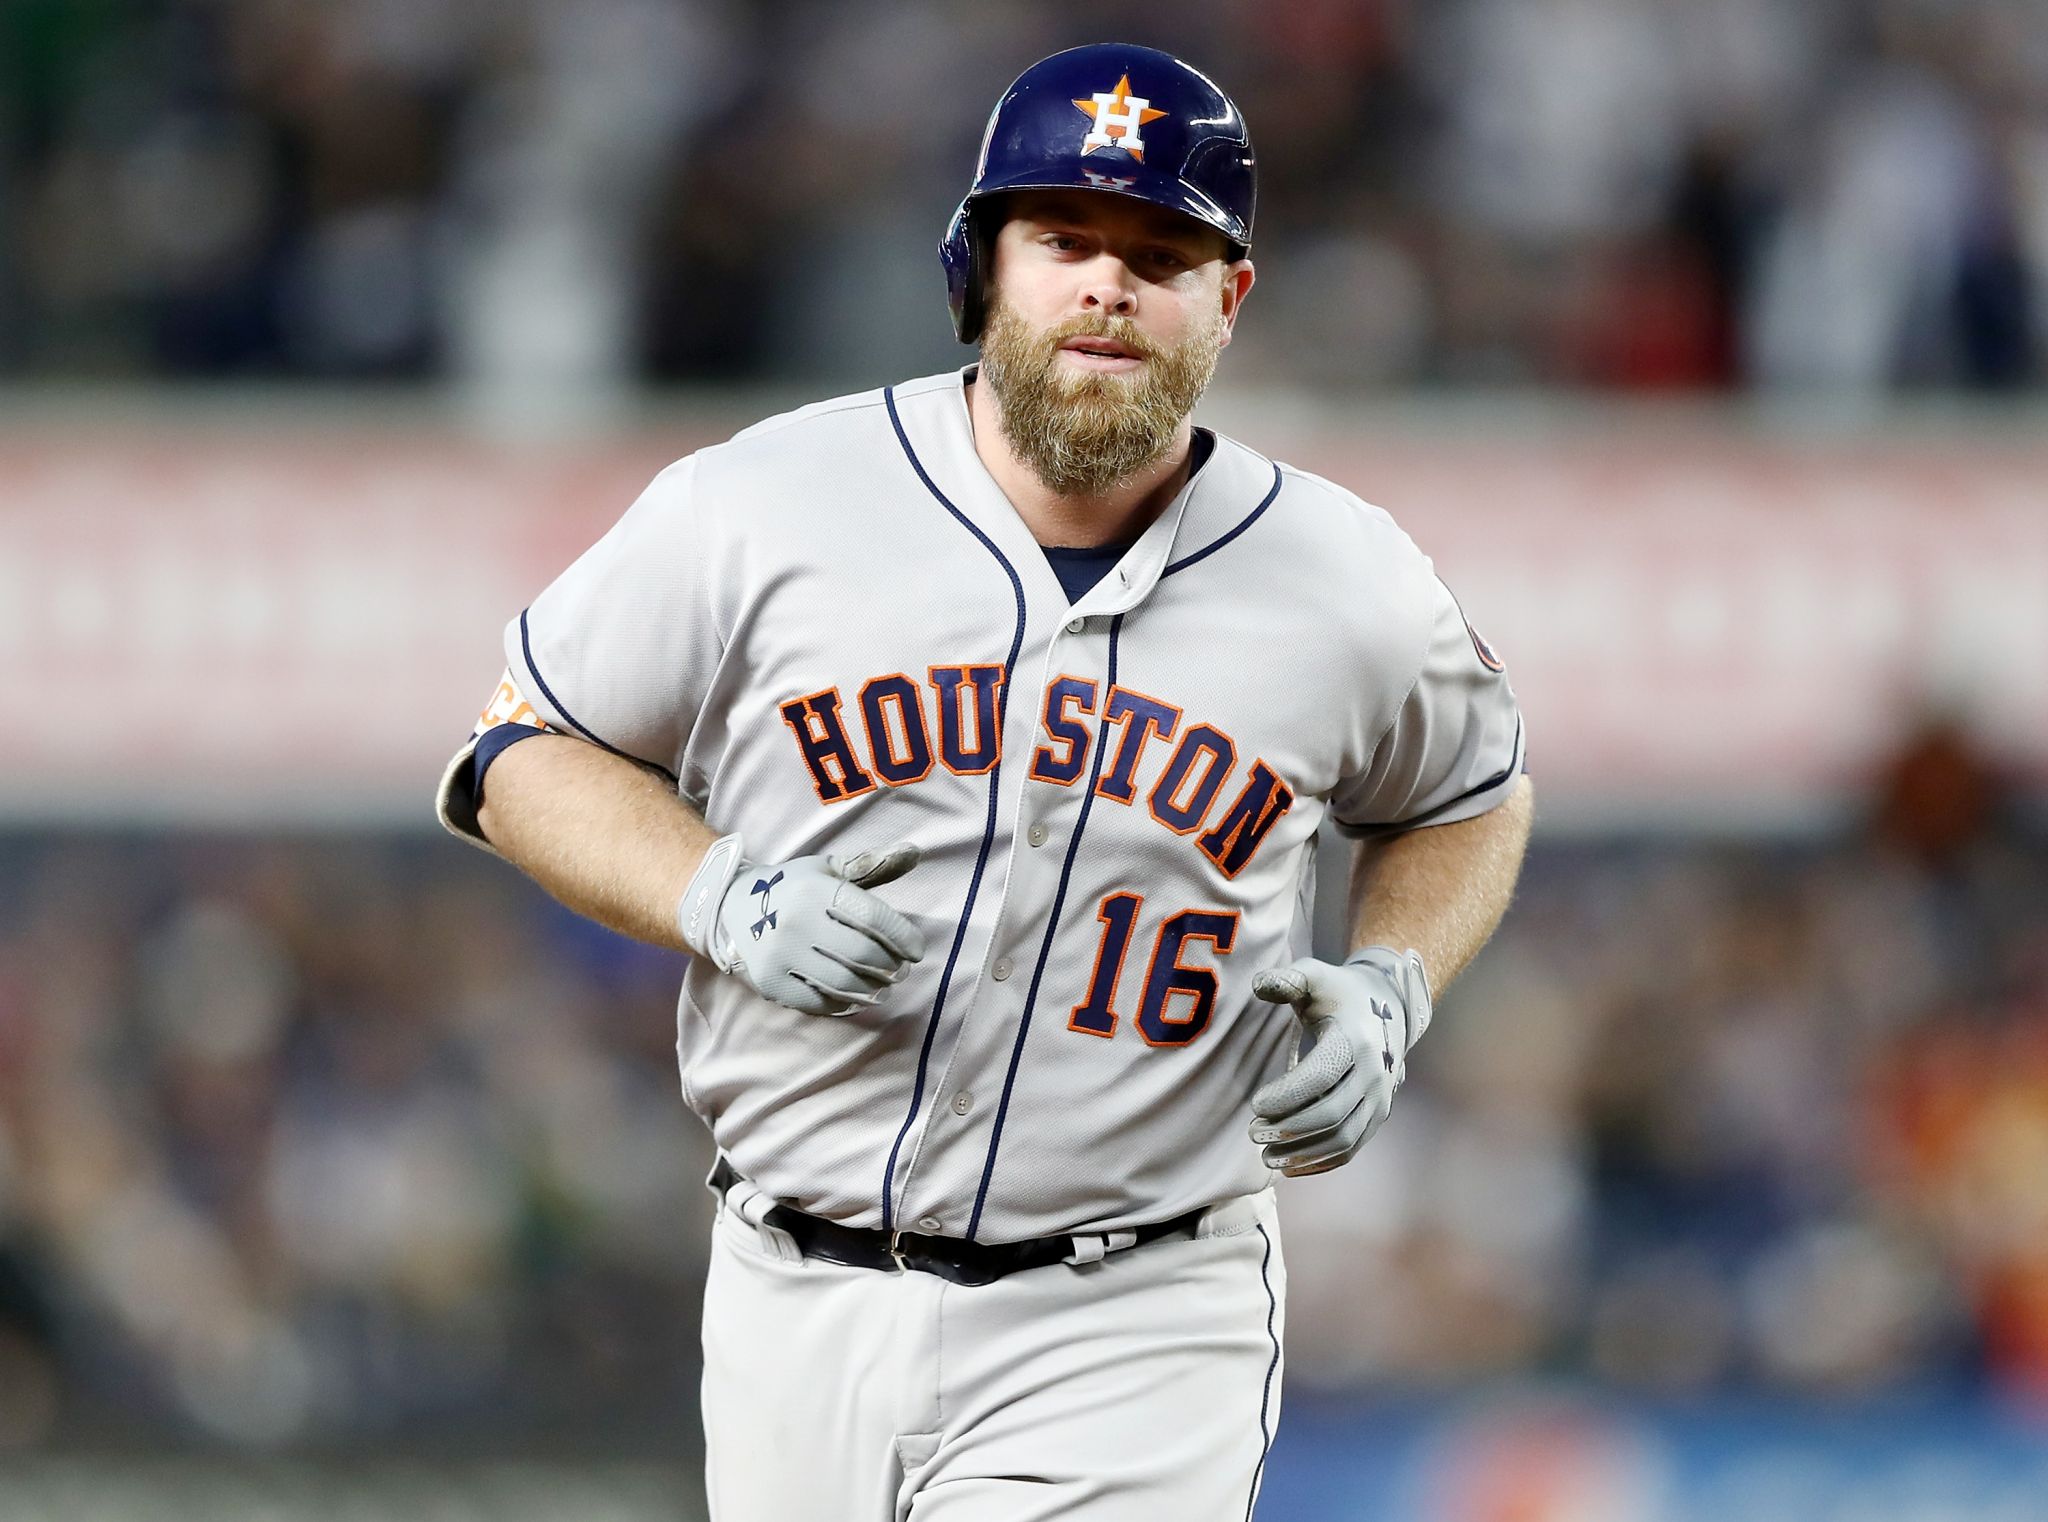 Brian McCann anxious to get started with Astros